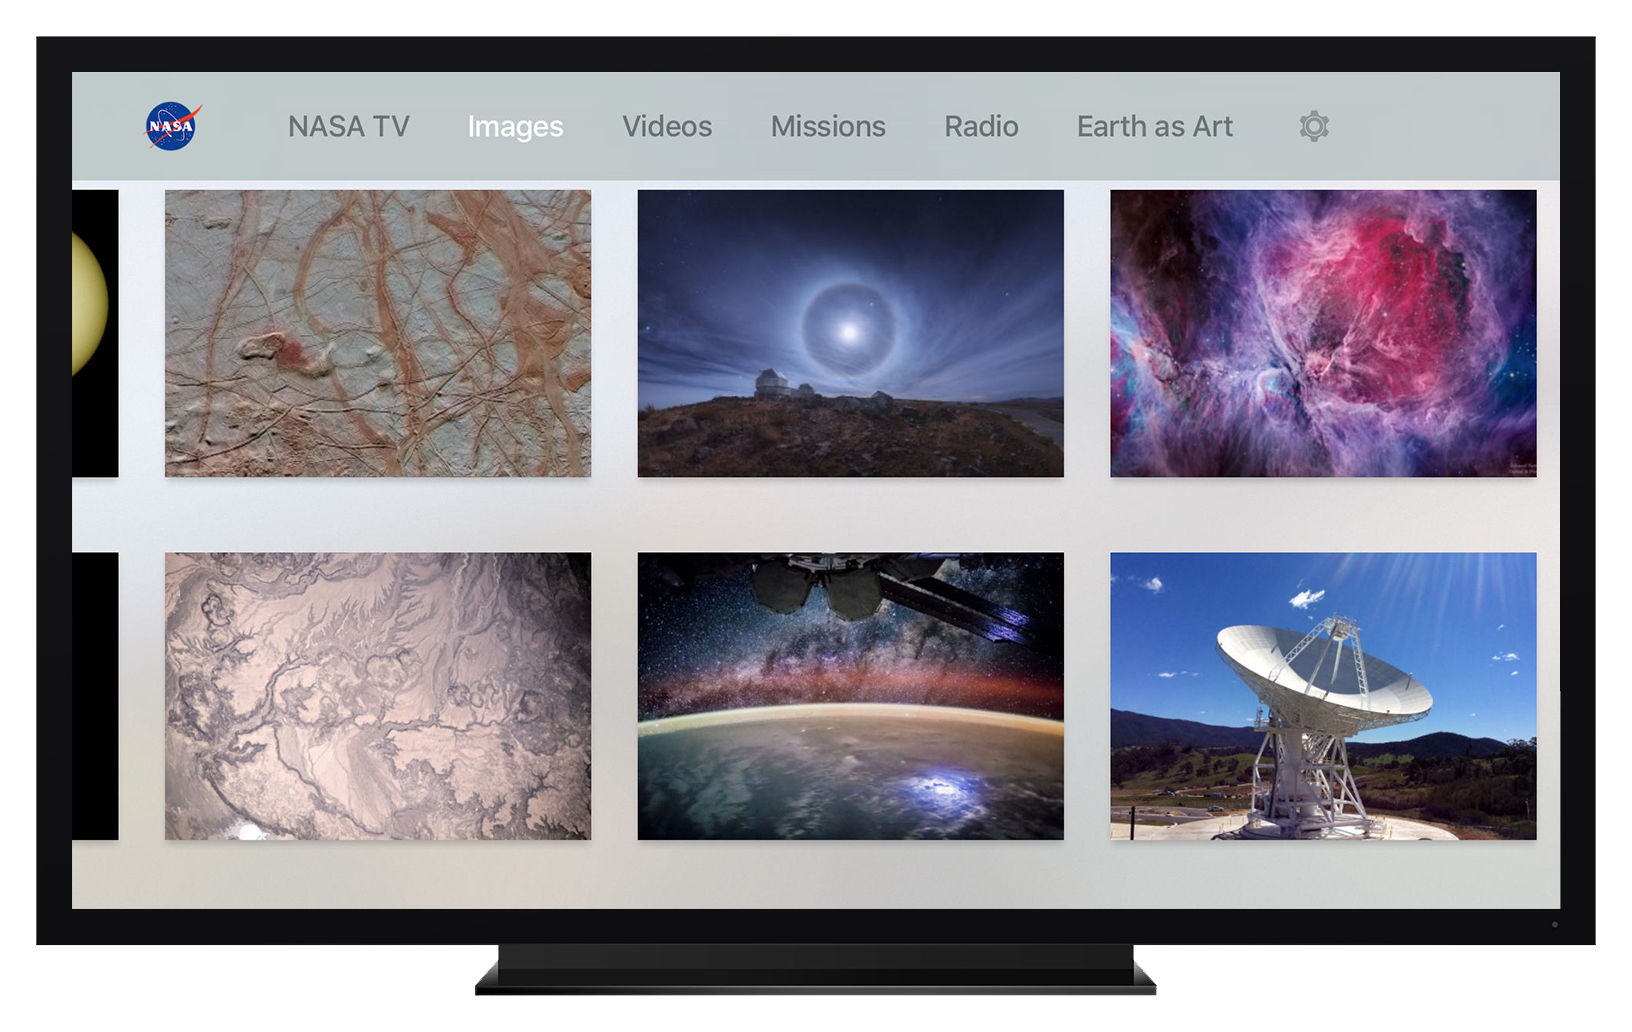 App will let users view the Earth as an art image gallery